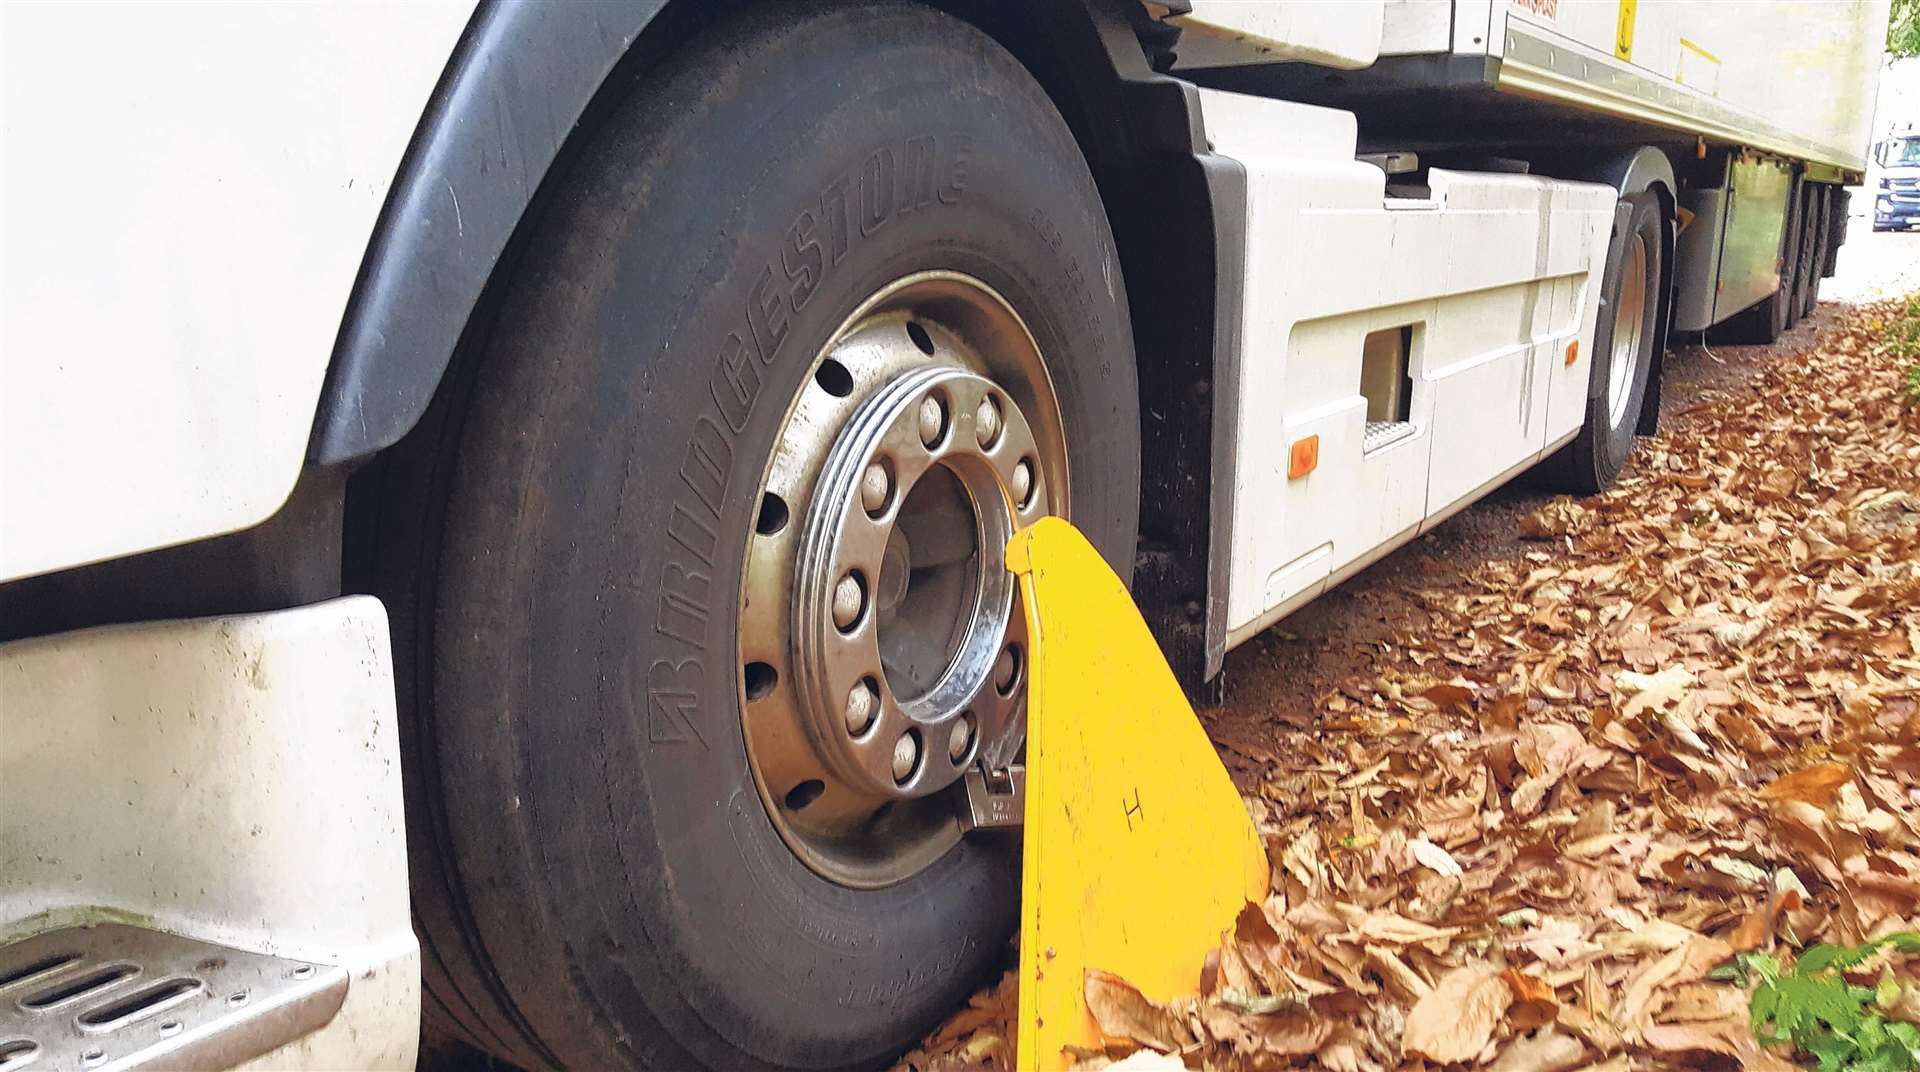 Council bosses want the clamping powers in Ashford to be extended